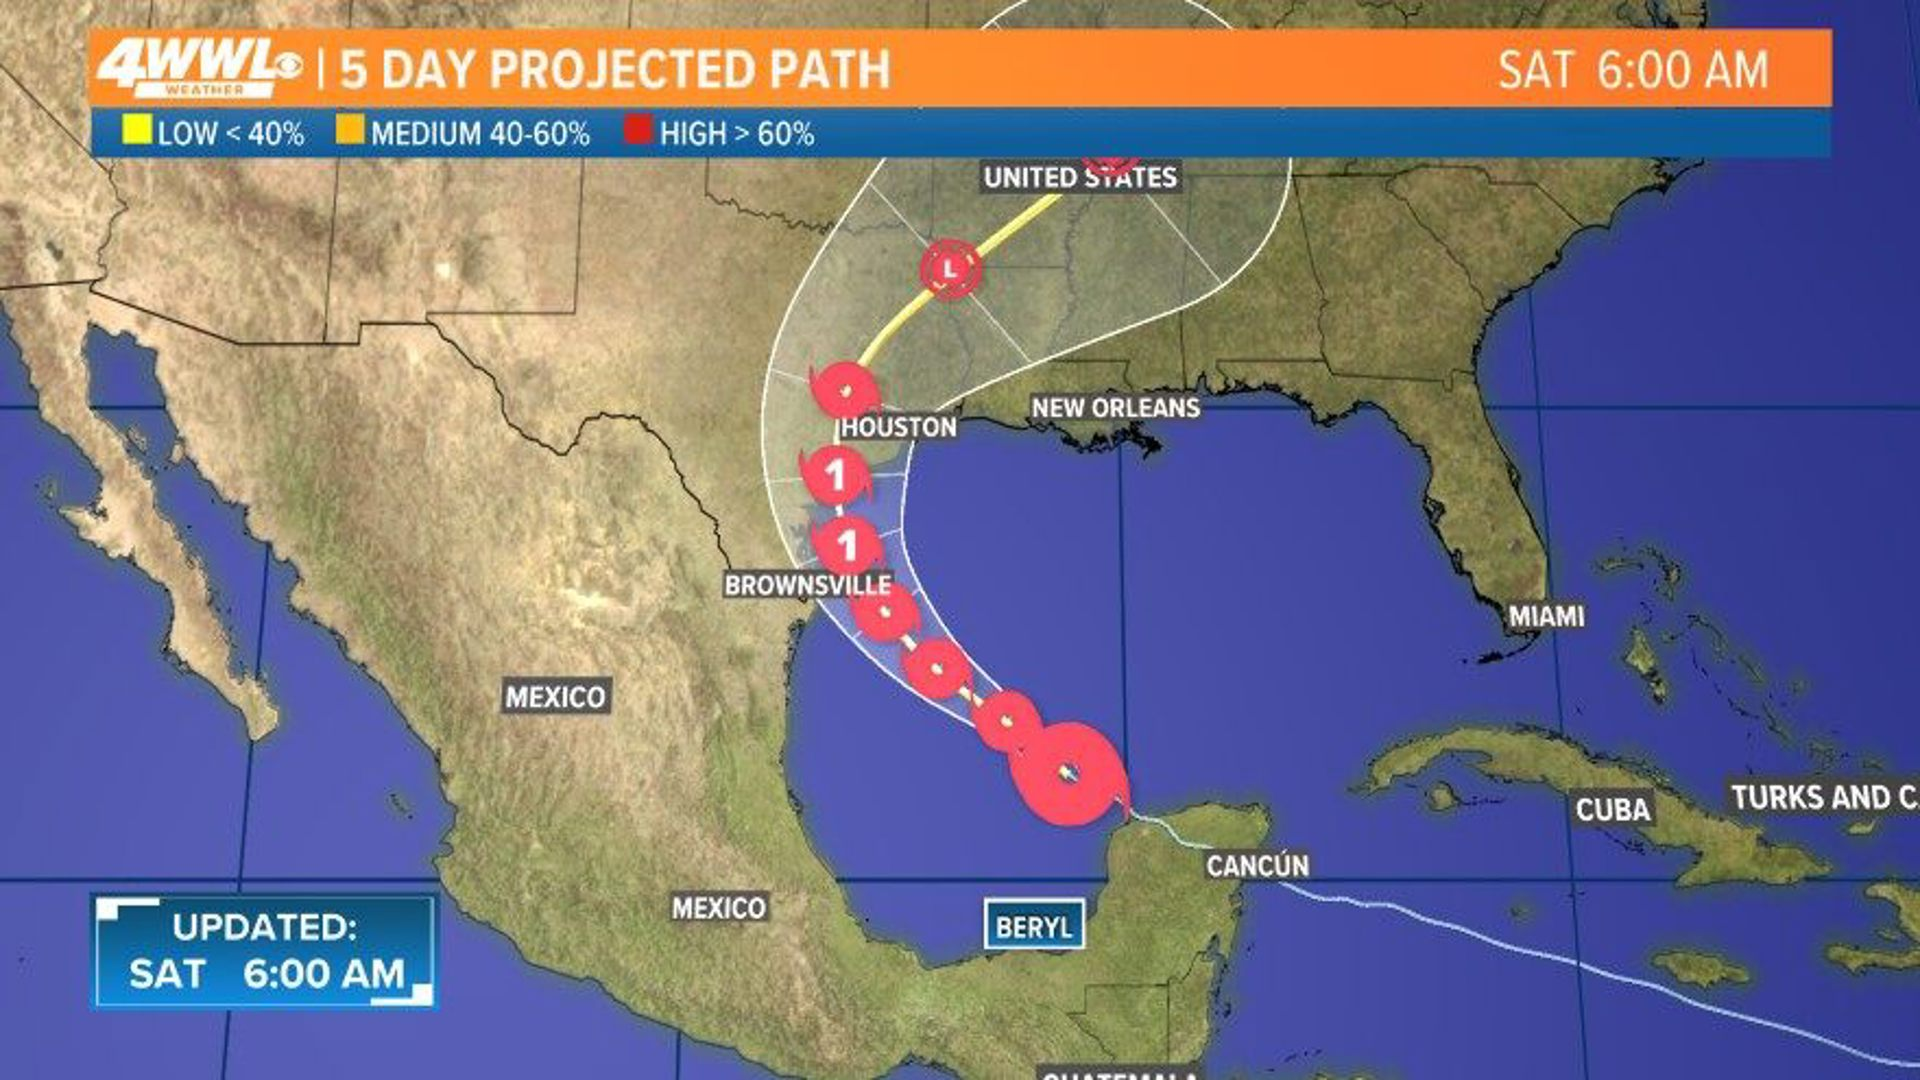 We're tracking Hurricane Beryl as it moves through the Gulf with an expected strike on the Gulf Coast of Texas sometime early Monday.